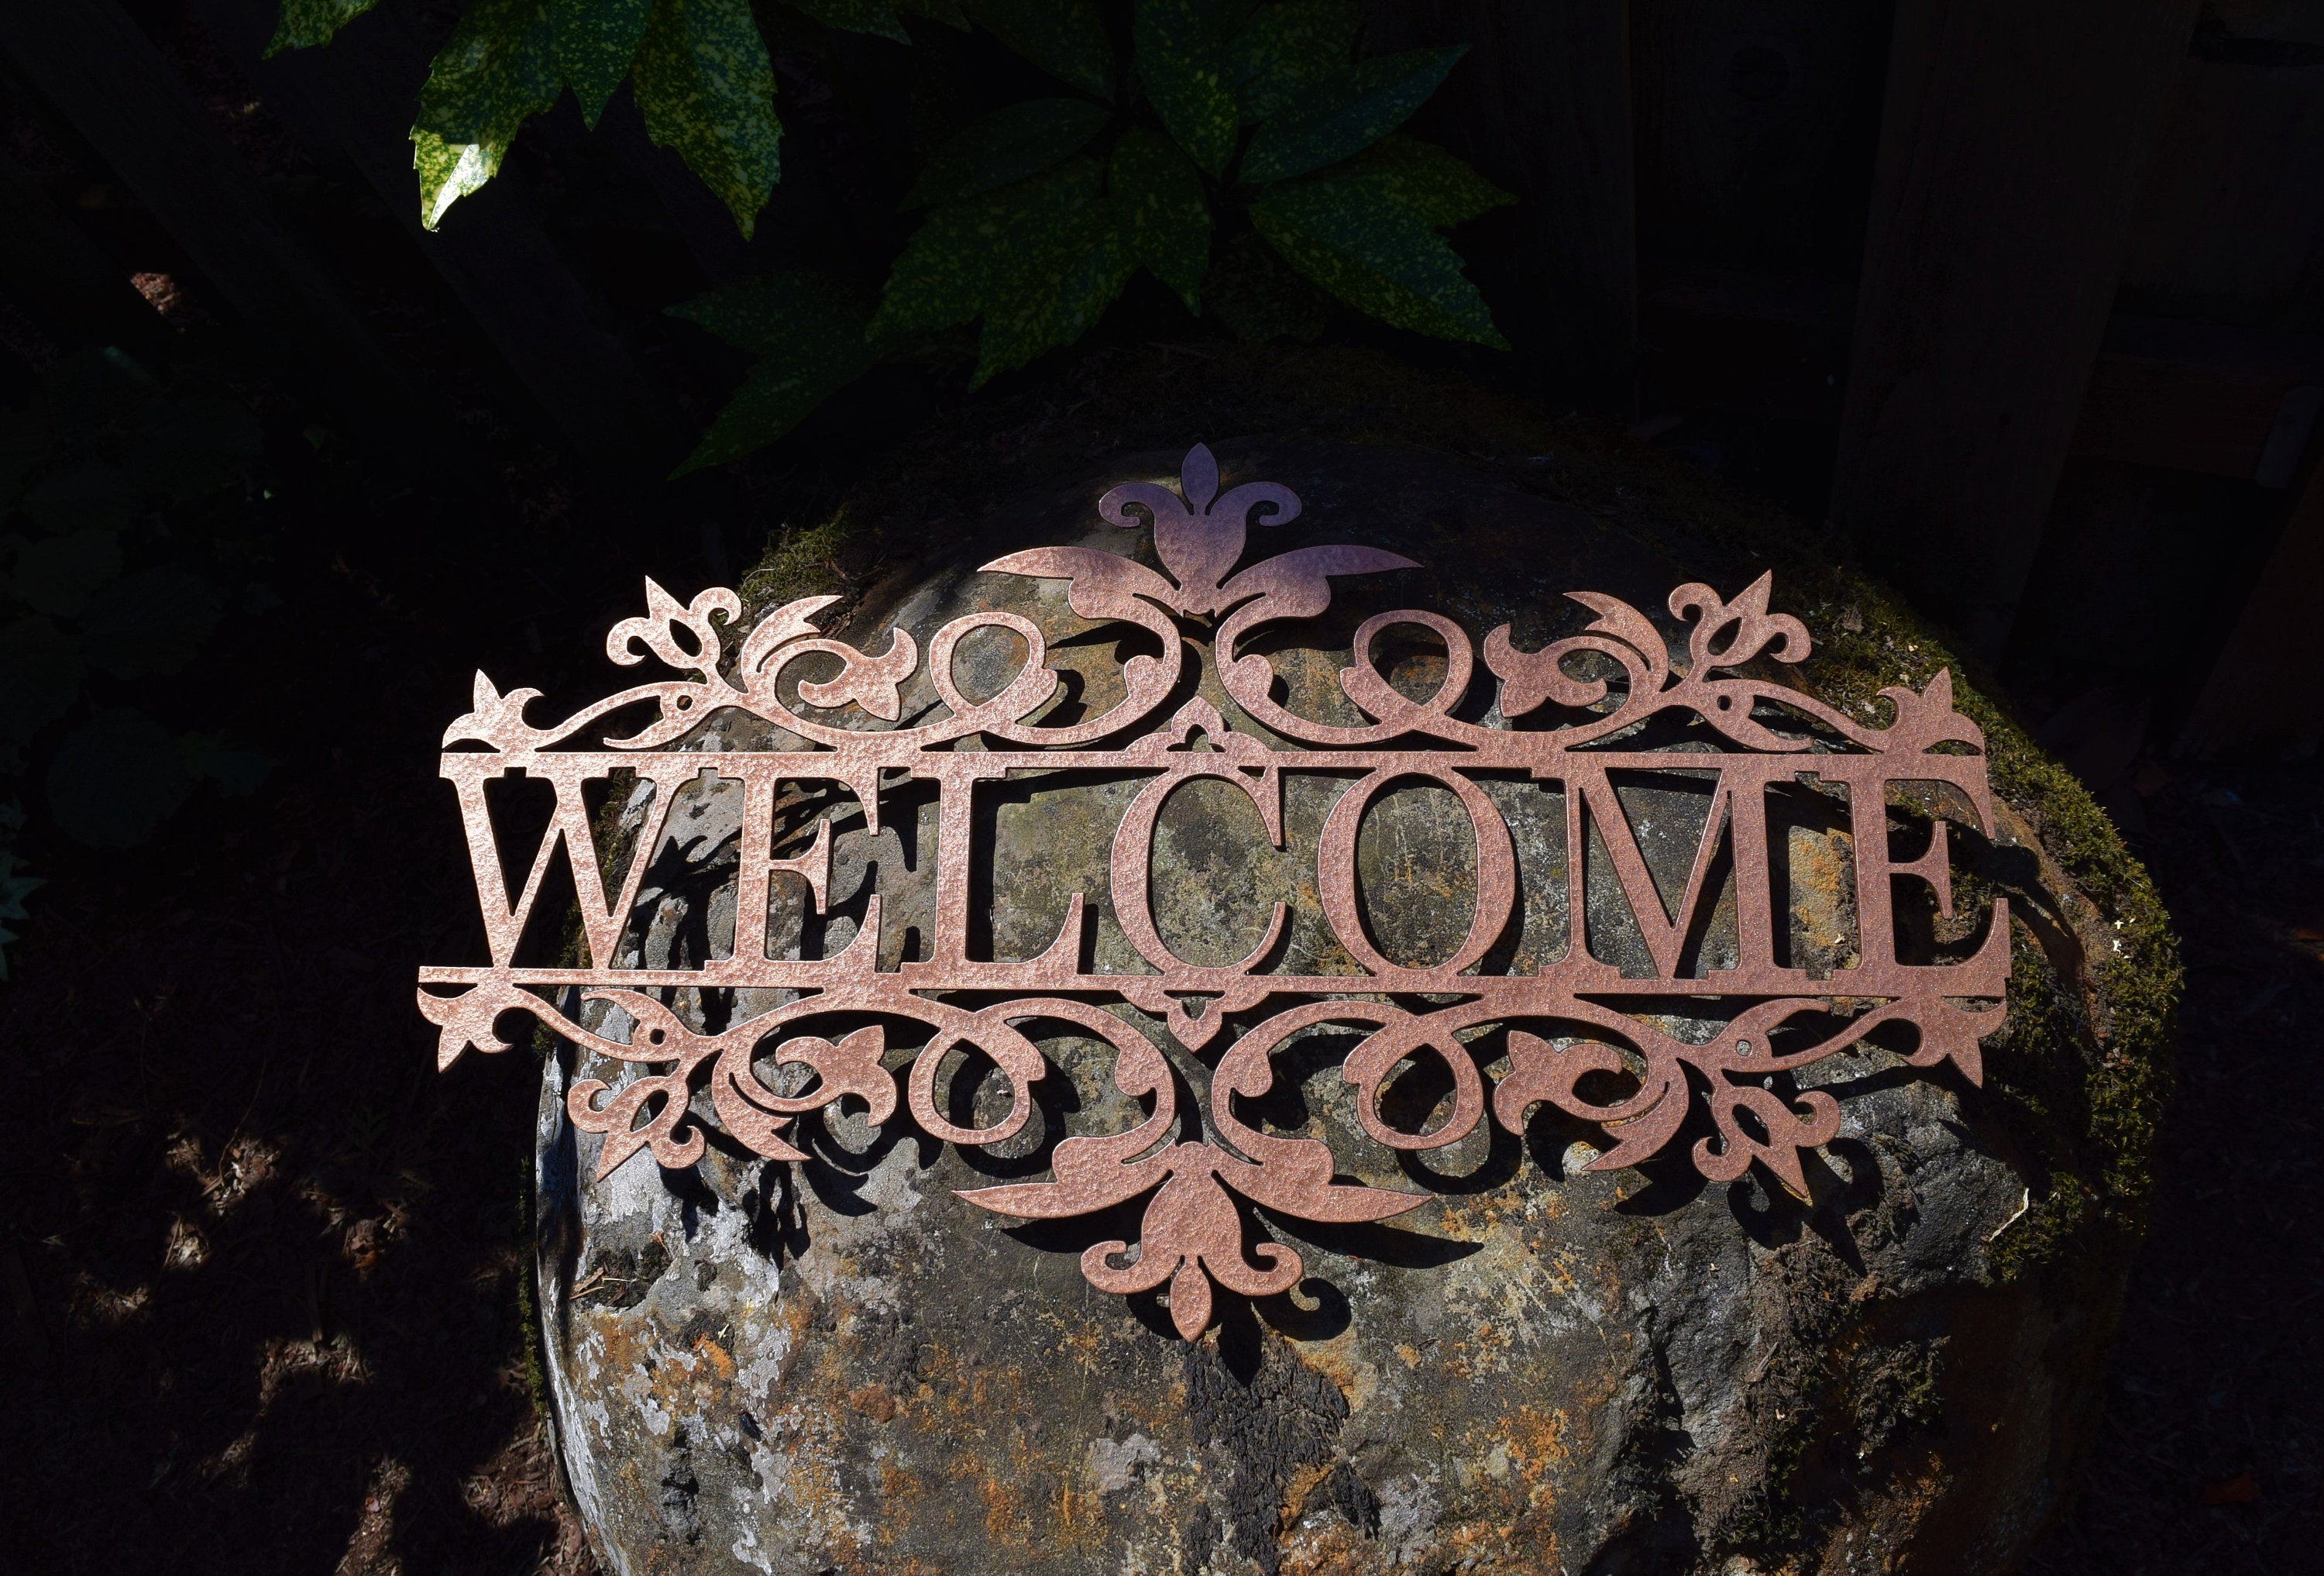 Personalized Metal Flourished Name Sign